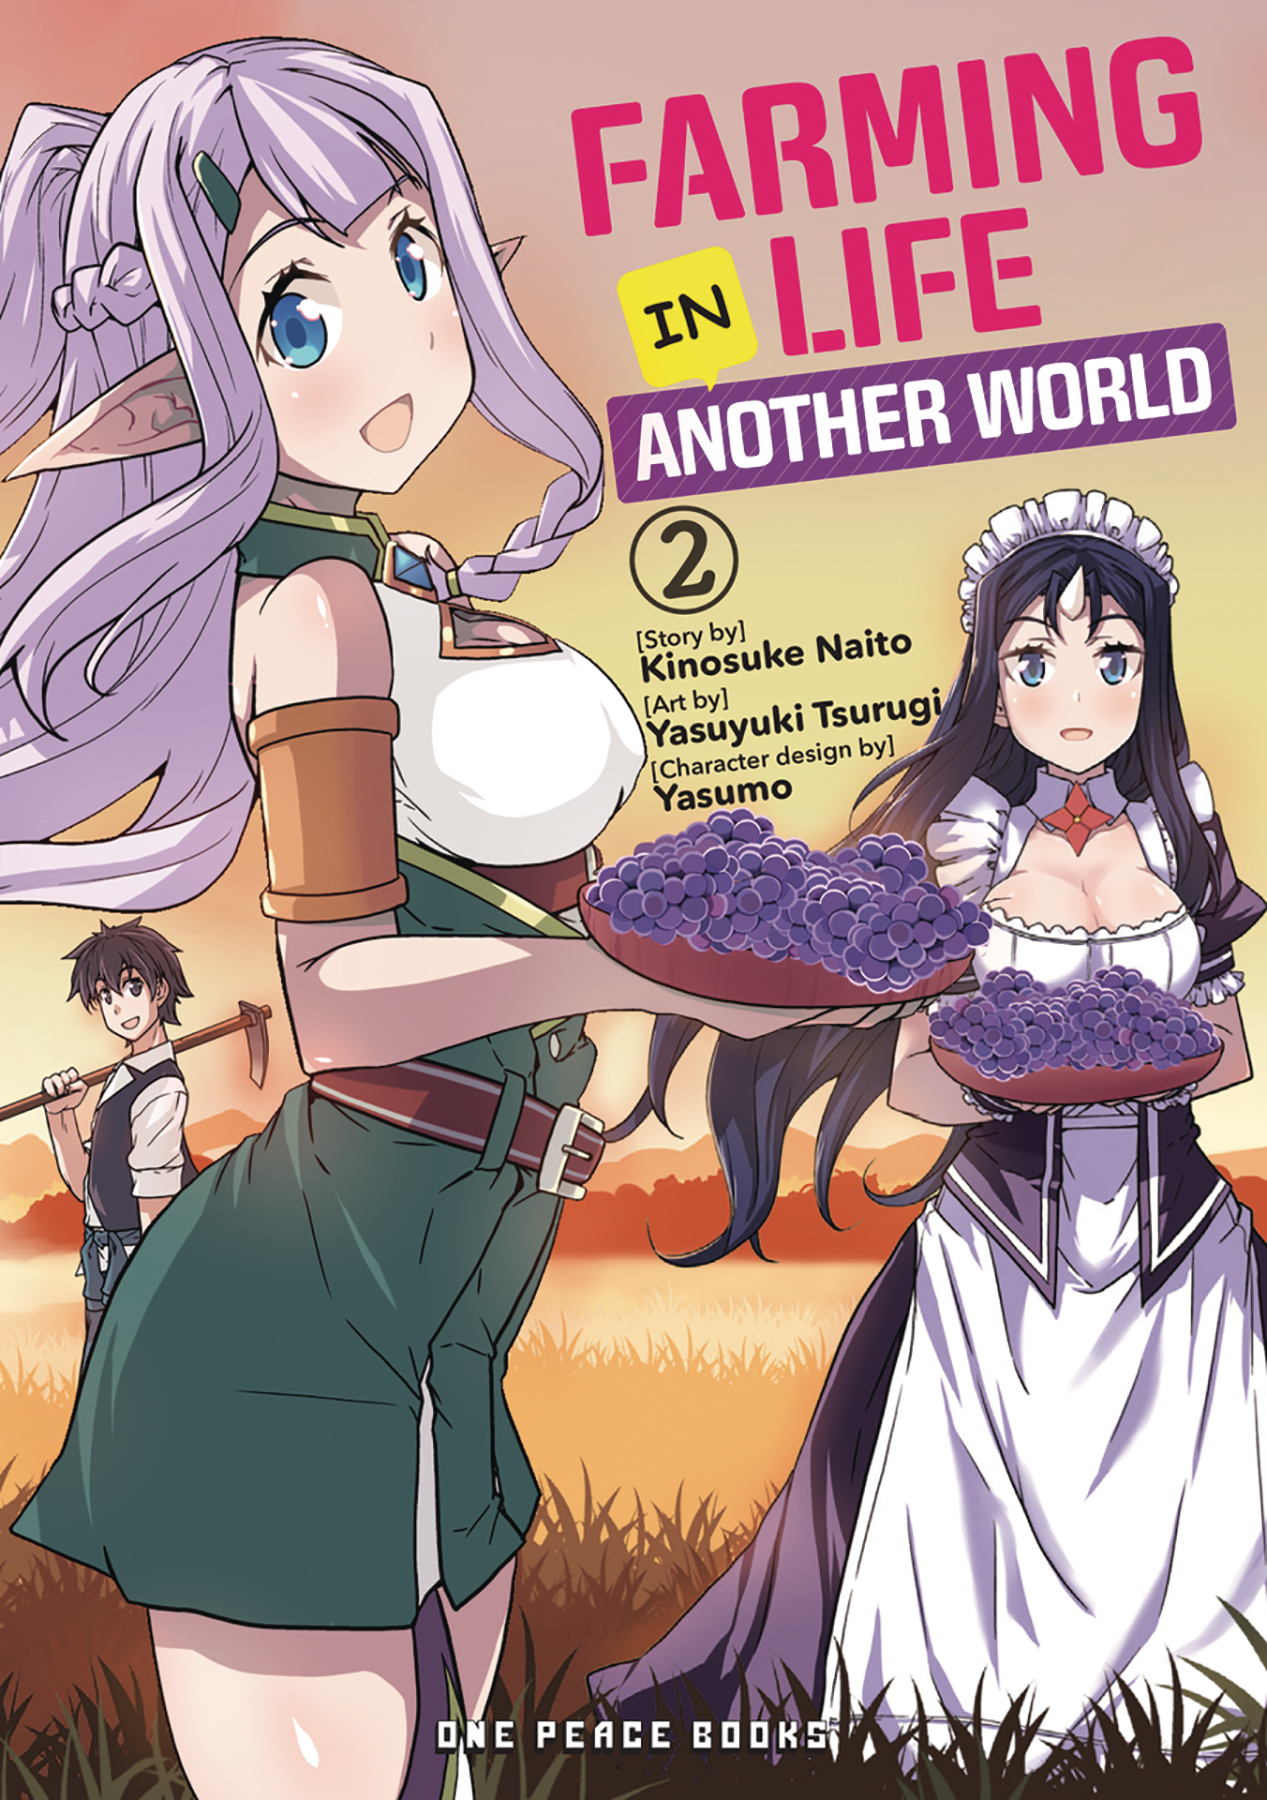 Farming Life in Another World Manga Volume 2